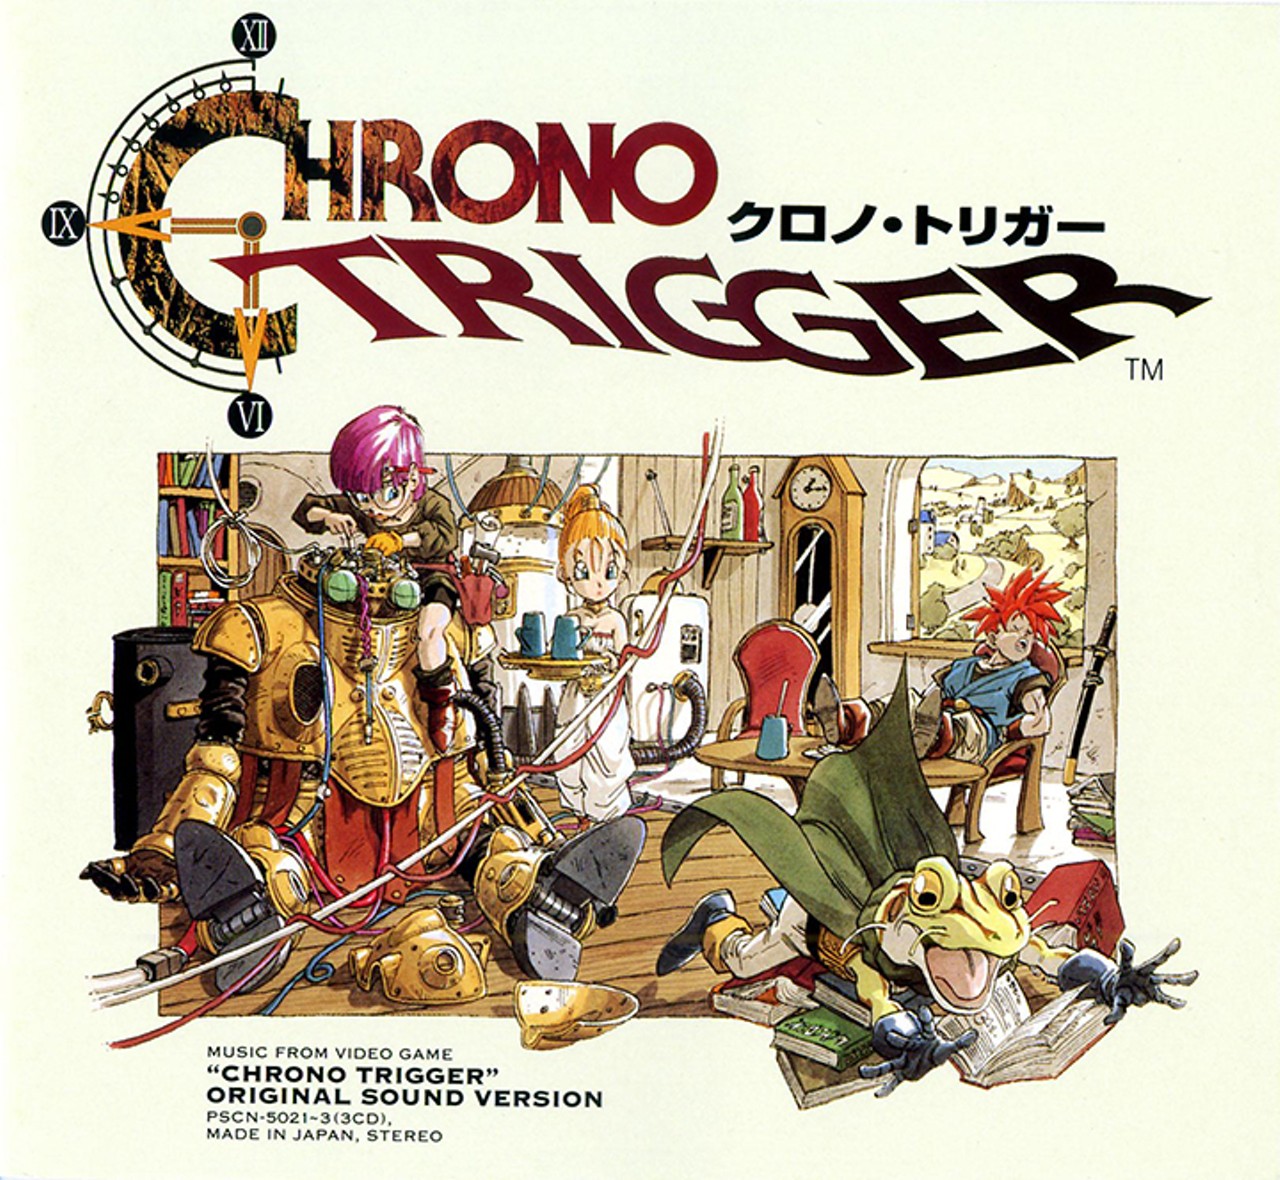 Friday, July 6Chrono Trigger: An Epic Orchestral Tribute at Wayne Densch Performing Arts Center